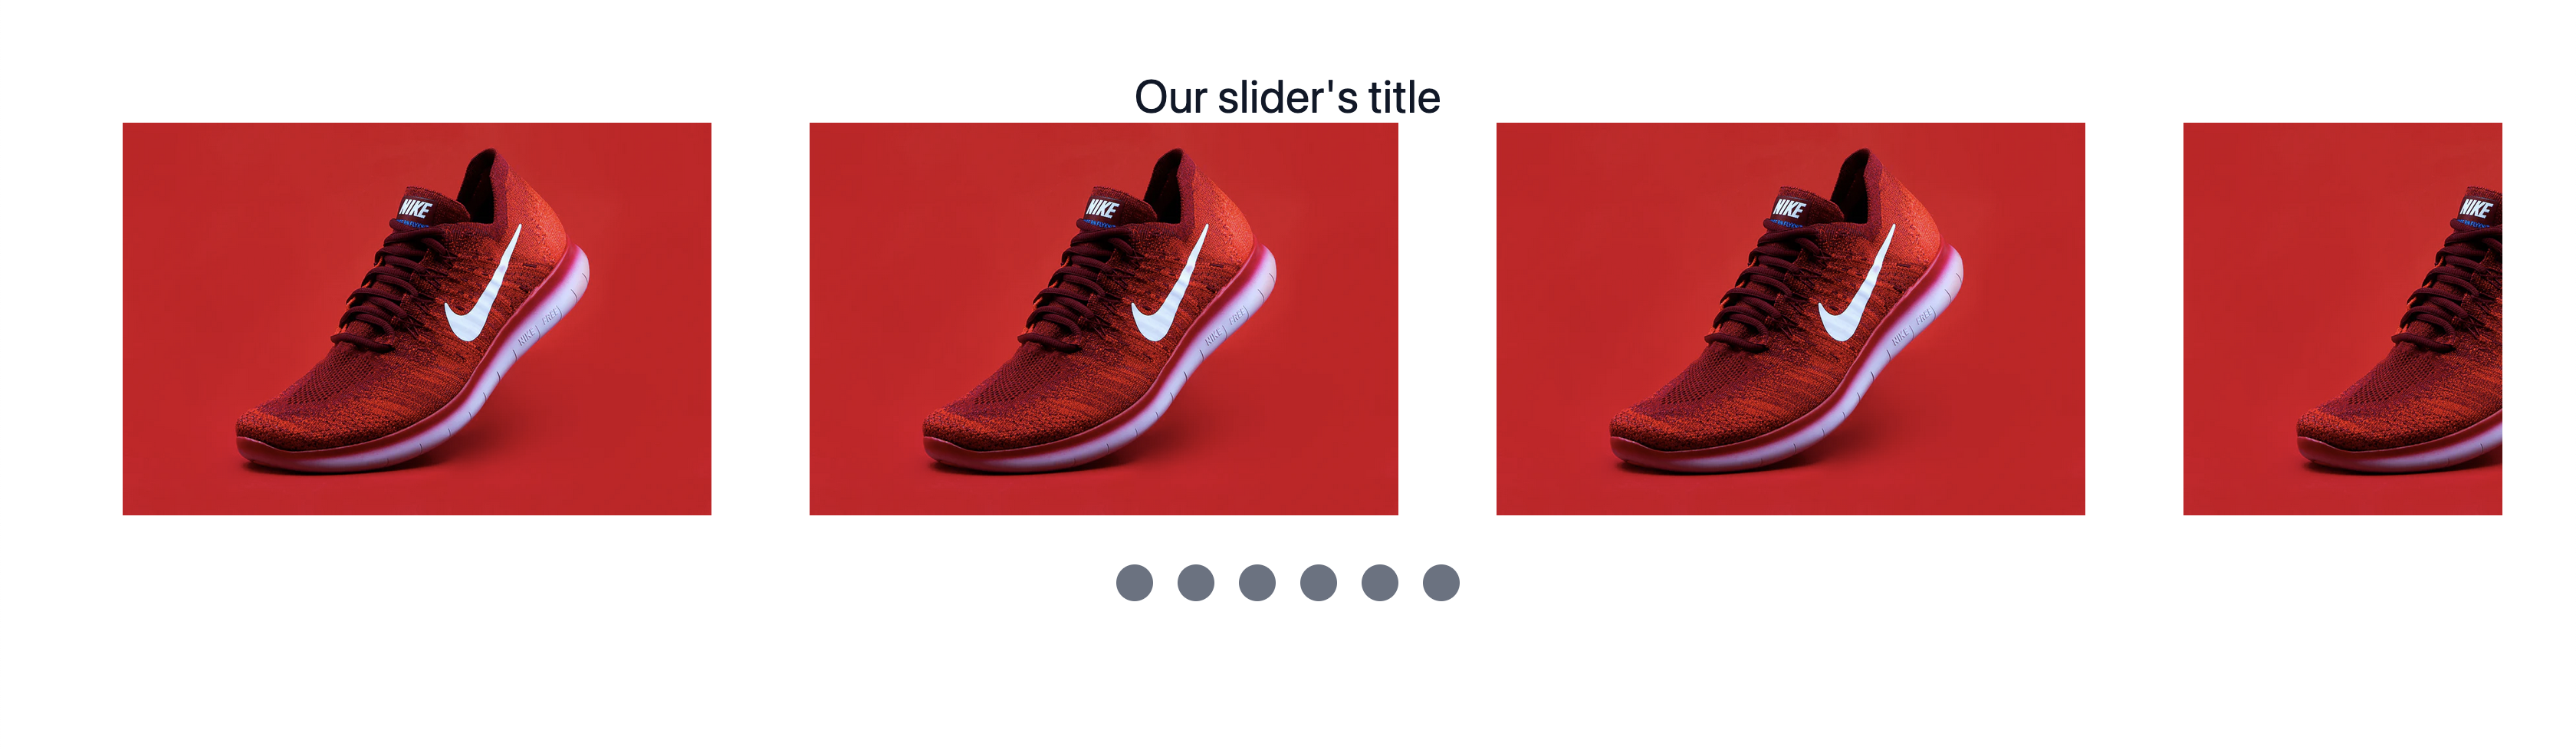 A screenshot of an image gallery of identical red shoes, with gray dots below